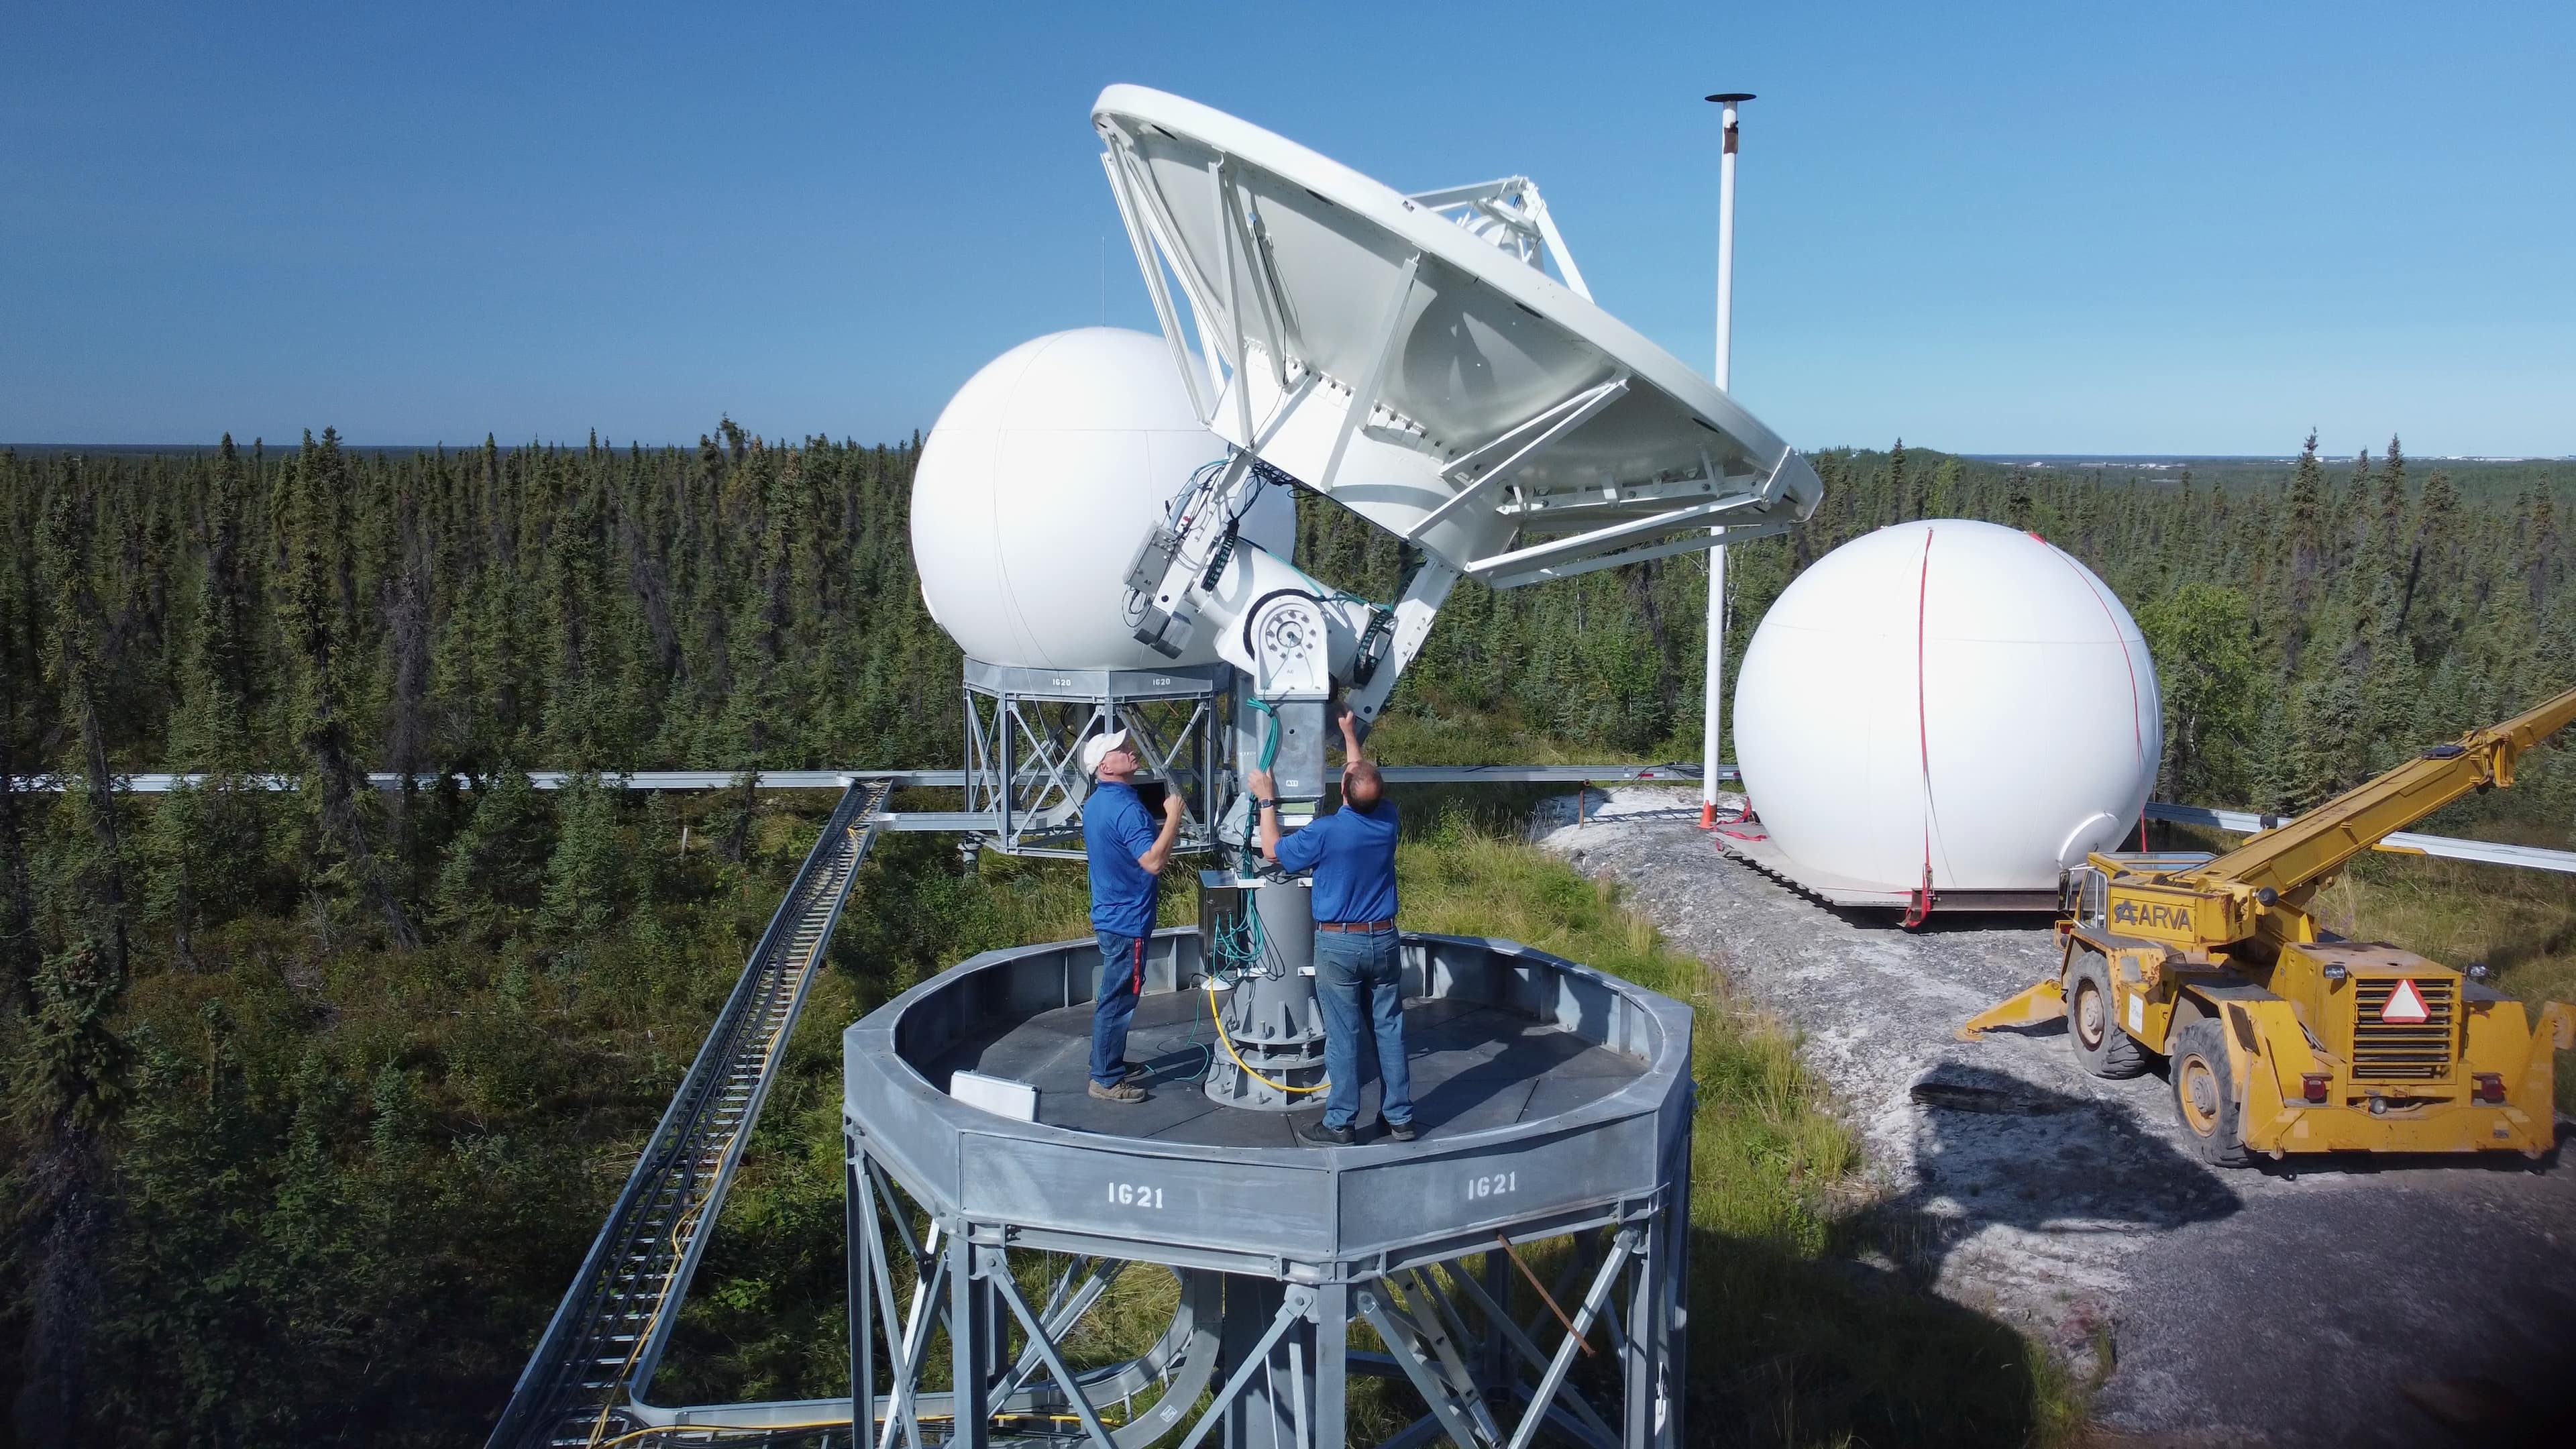 Workers making adjustments at the Canadian Satellite Ground Station in Inuvik, Northwest Territories